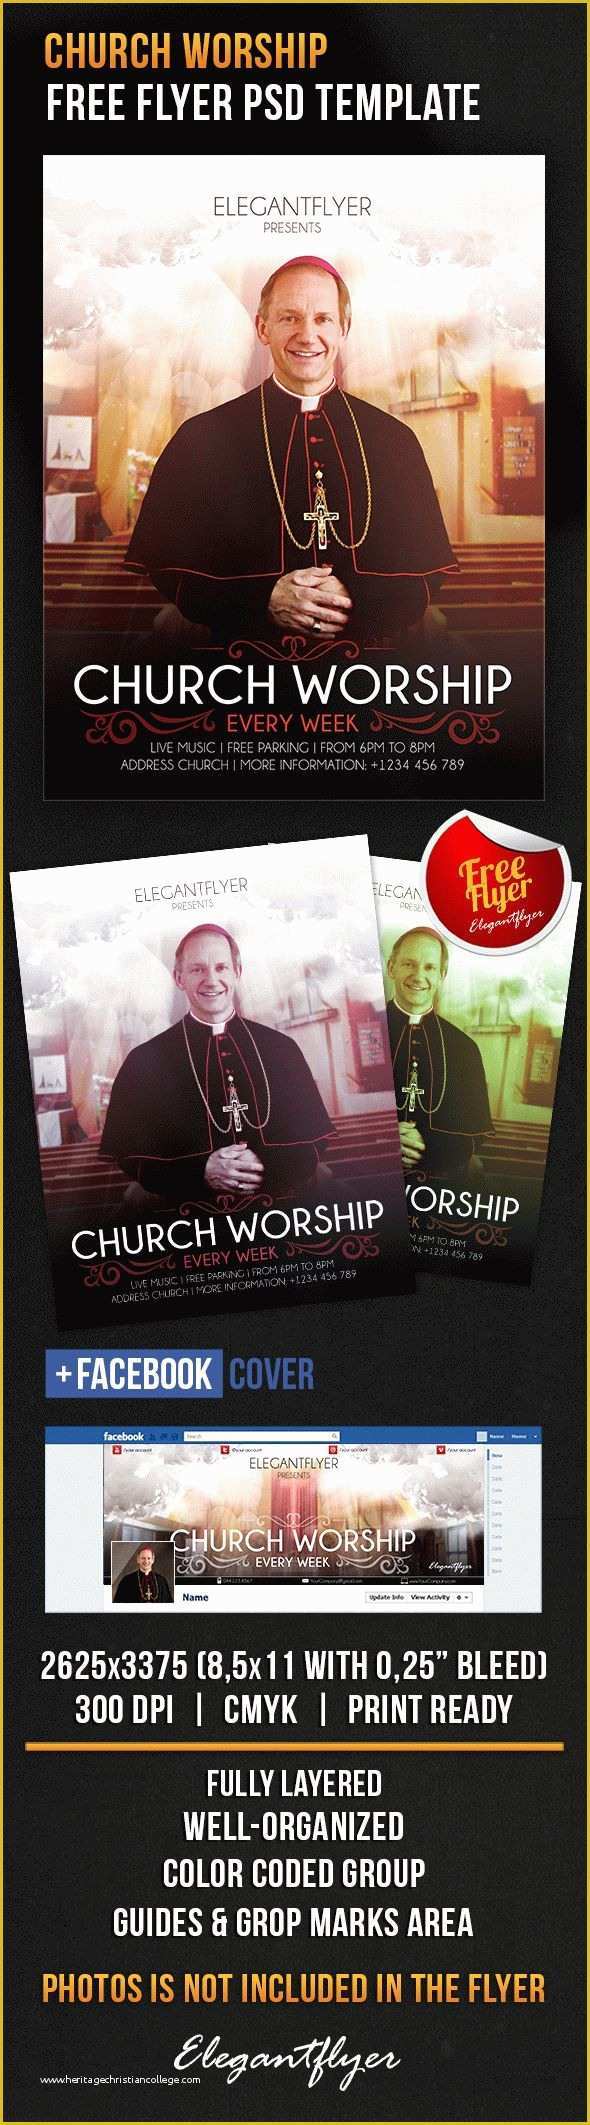 Free Church Flyer Templates Photoshop Of Free Shop Flyer Template Church Worship